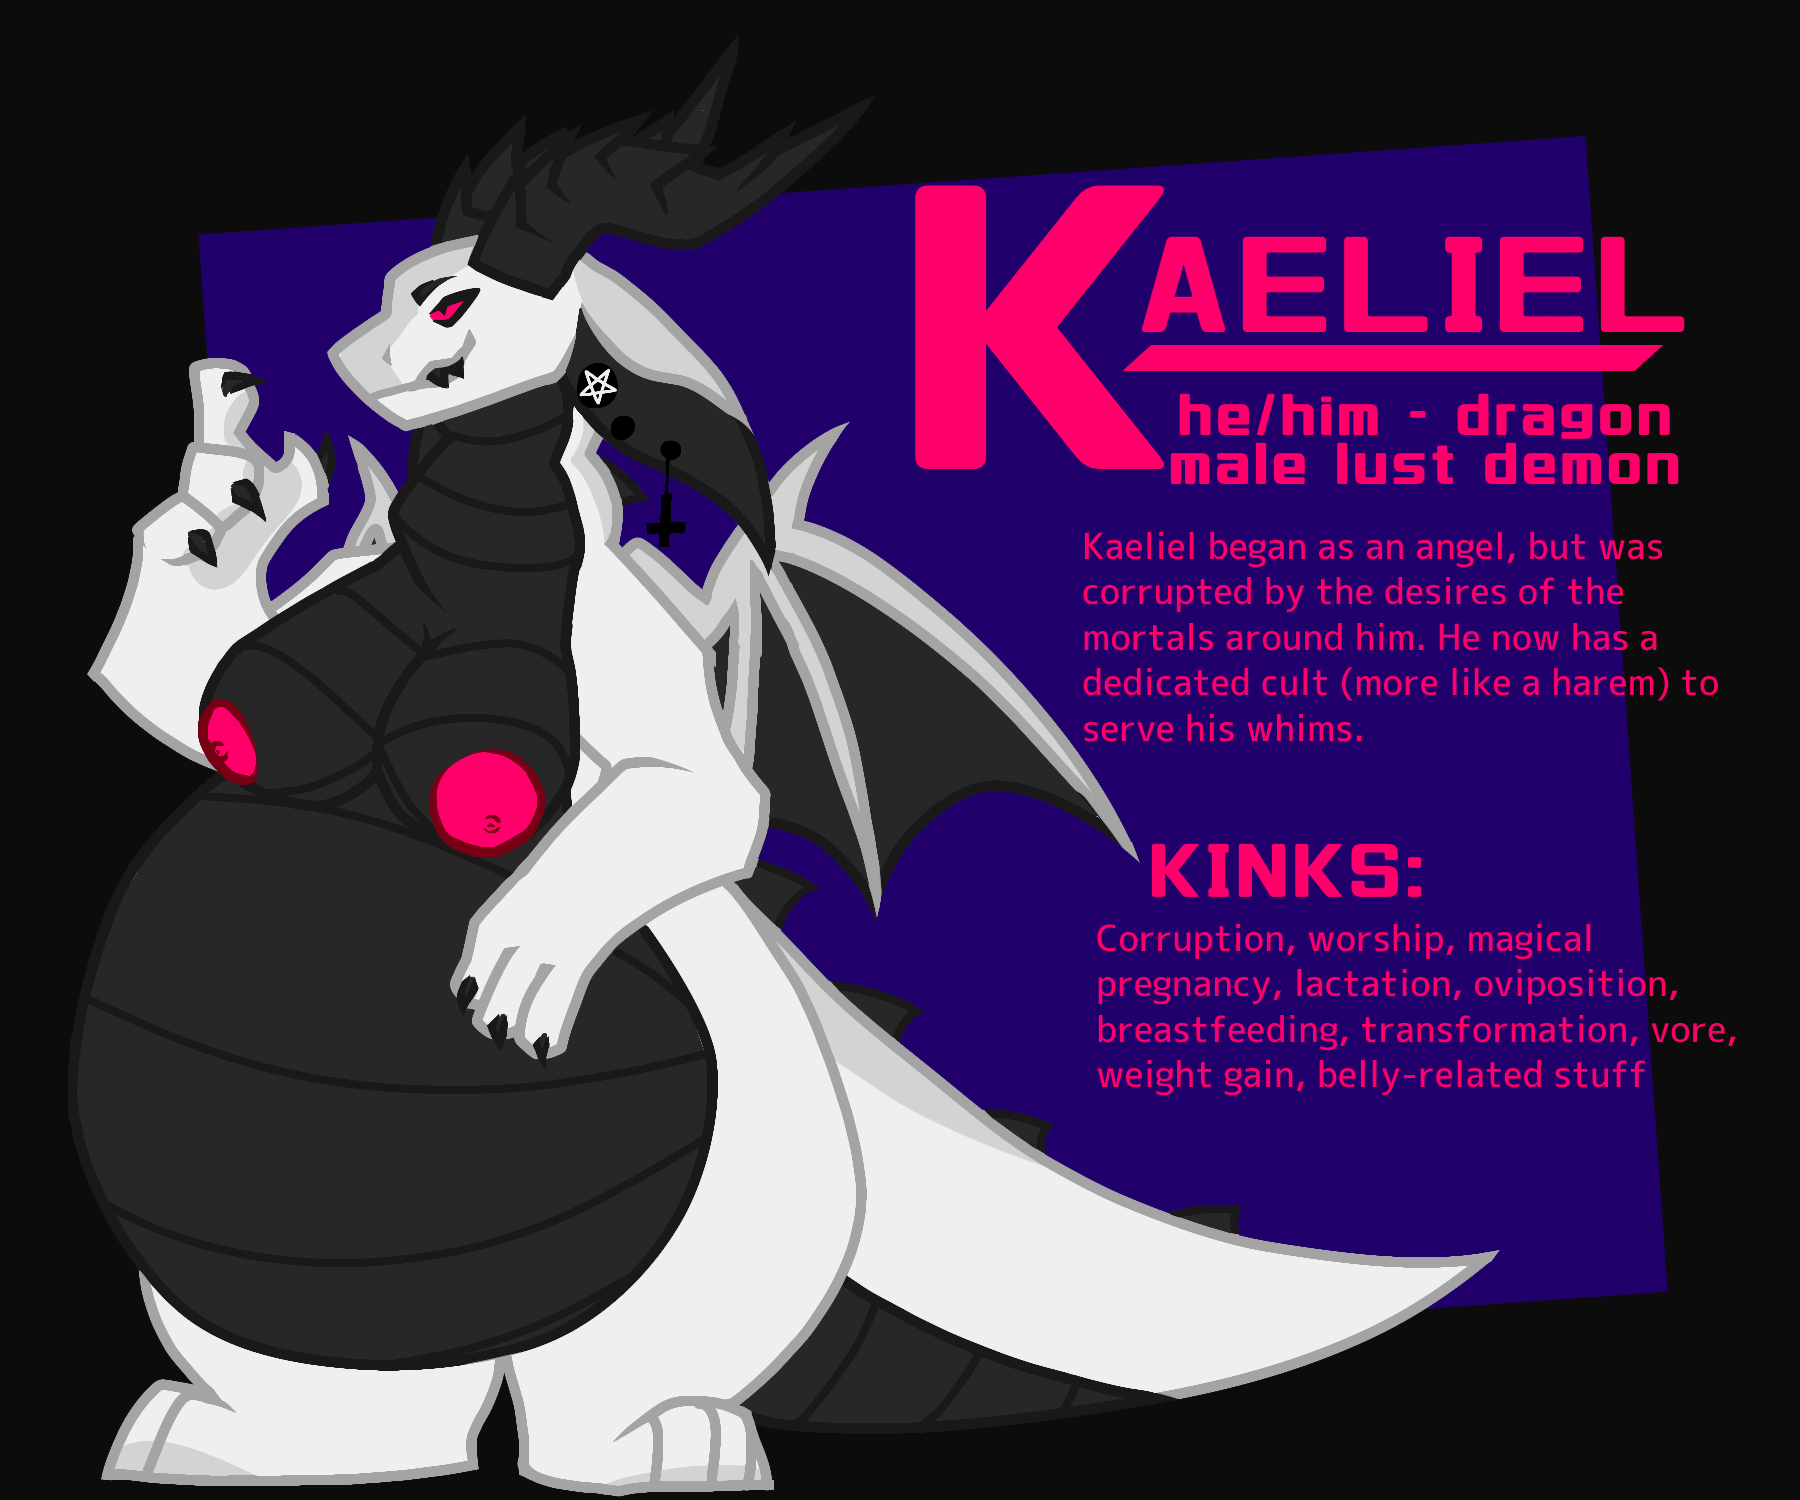 Kaeliel is a white dragon with some light gray markings and black belly scales. His horns are also black as well as long, ridged, and kinked. His piercing eyes are hot pink and his pupils are slits. He has large, goat-like ears that reach all the way down to his shoulders, and he has inverted cross earrings and gauges with inverted pentacles. He has large breasts with pink nipples, and is very bottom heavy.